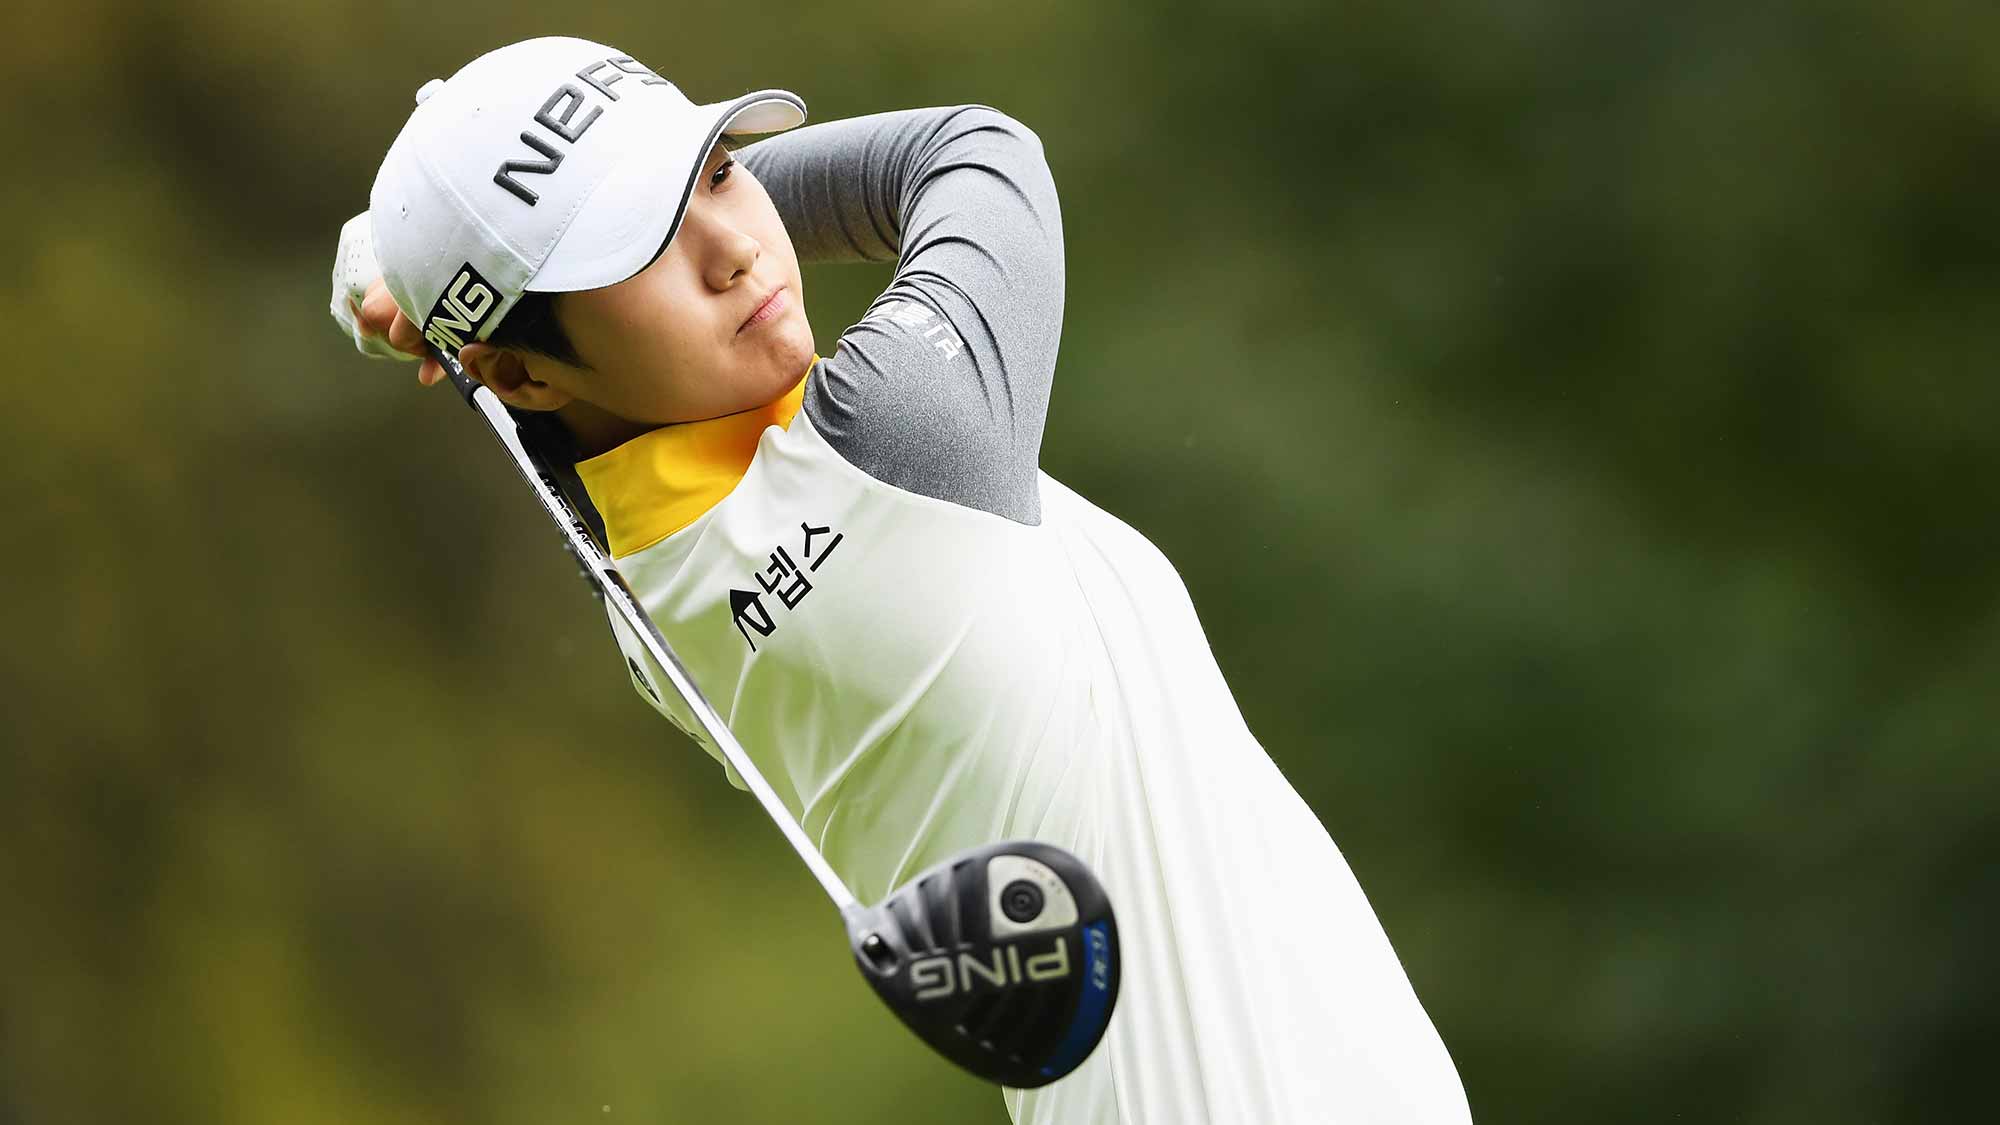 Sung Hyun Park of Korea plays a shot during the first round of The Evian Championship